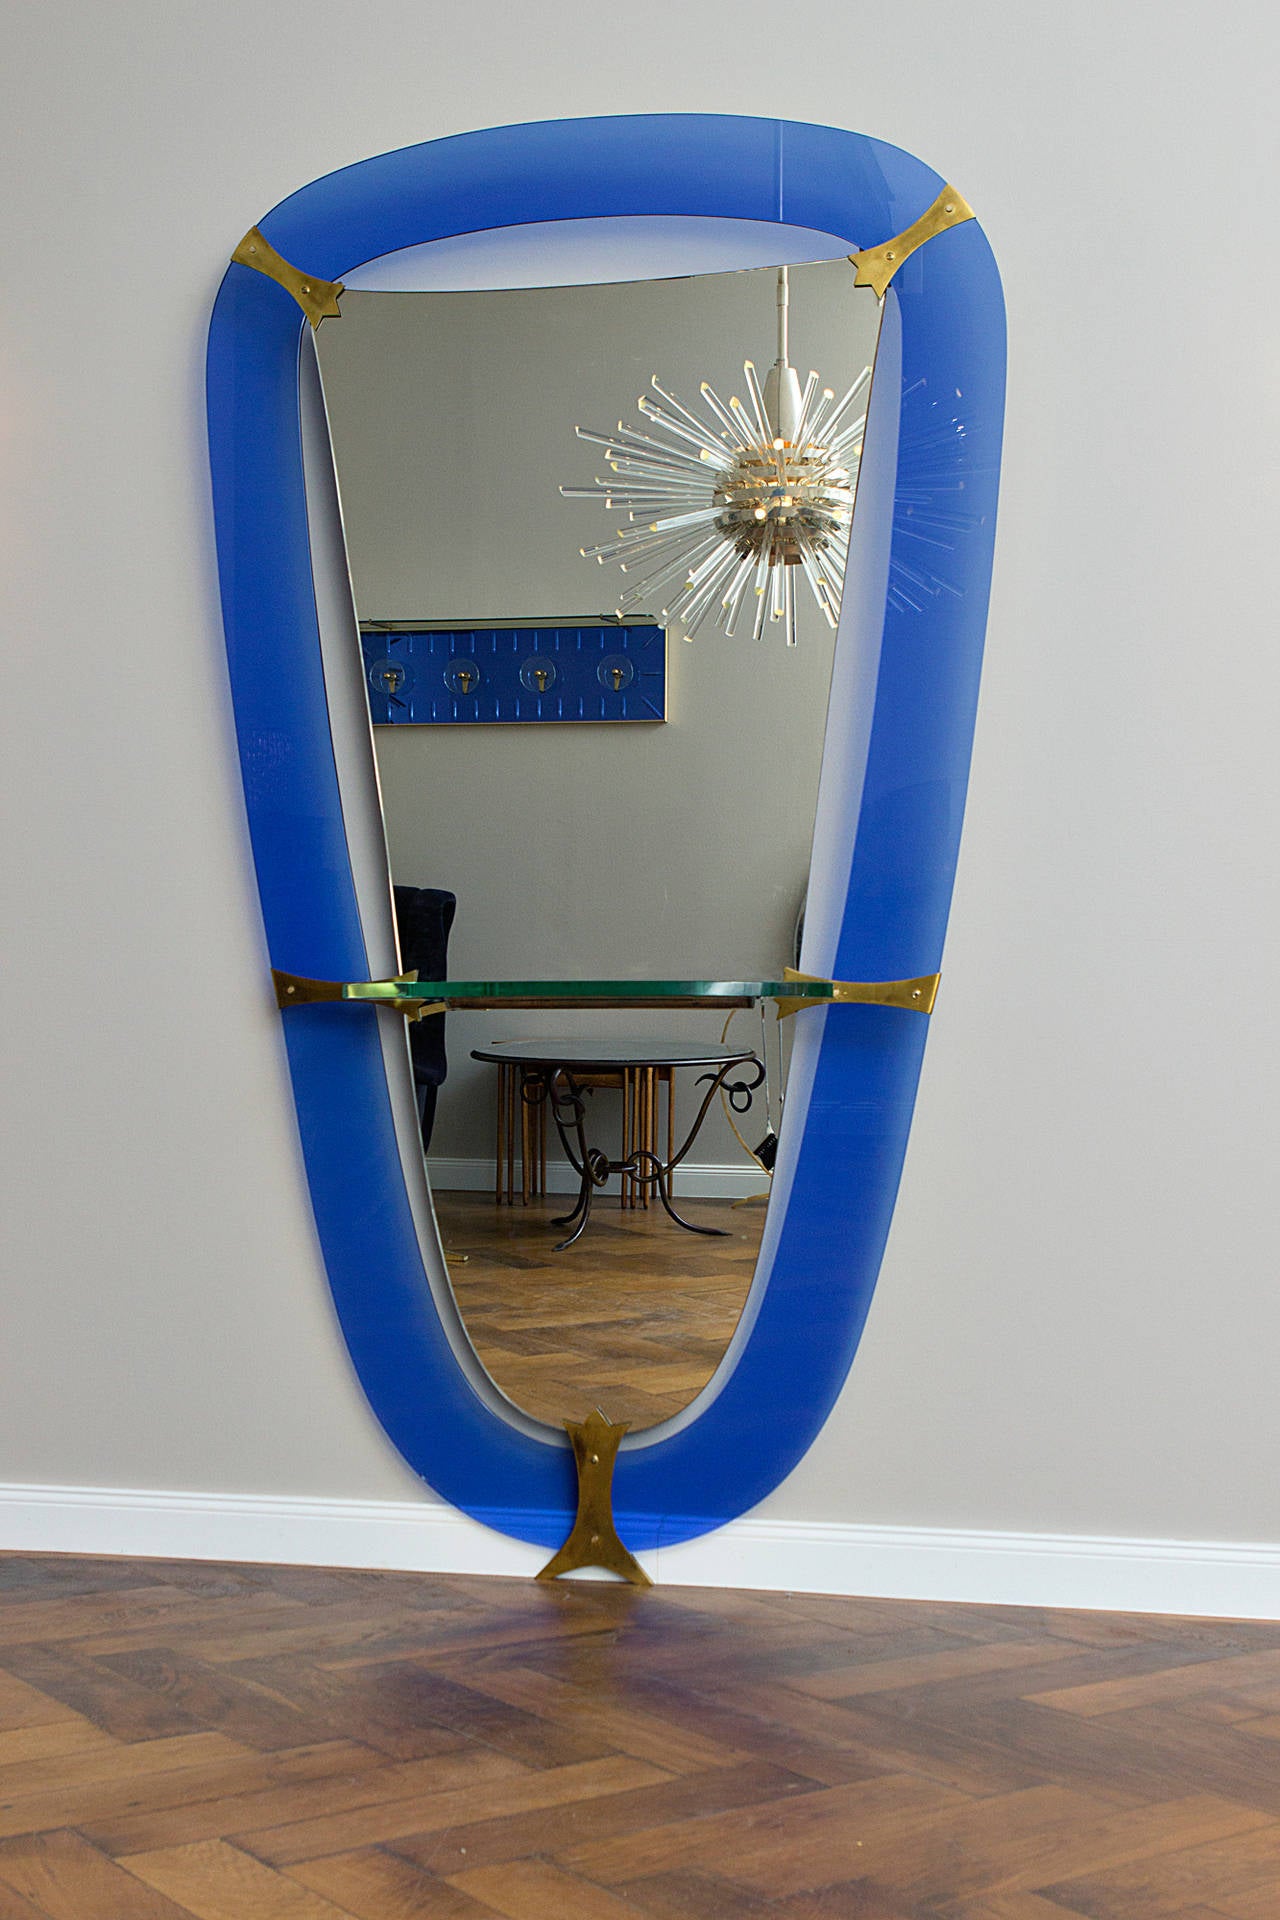 Rare Cristal Art mirror Italy circa 1950, Prod. Cristal Art, blue glass, joints in polished brass, shelf wooden frame, mirrored glass. 
Height 217 x length 122 x depth 25 cm